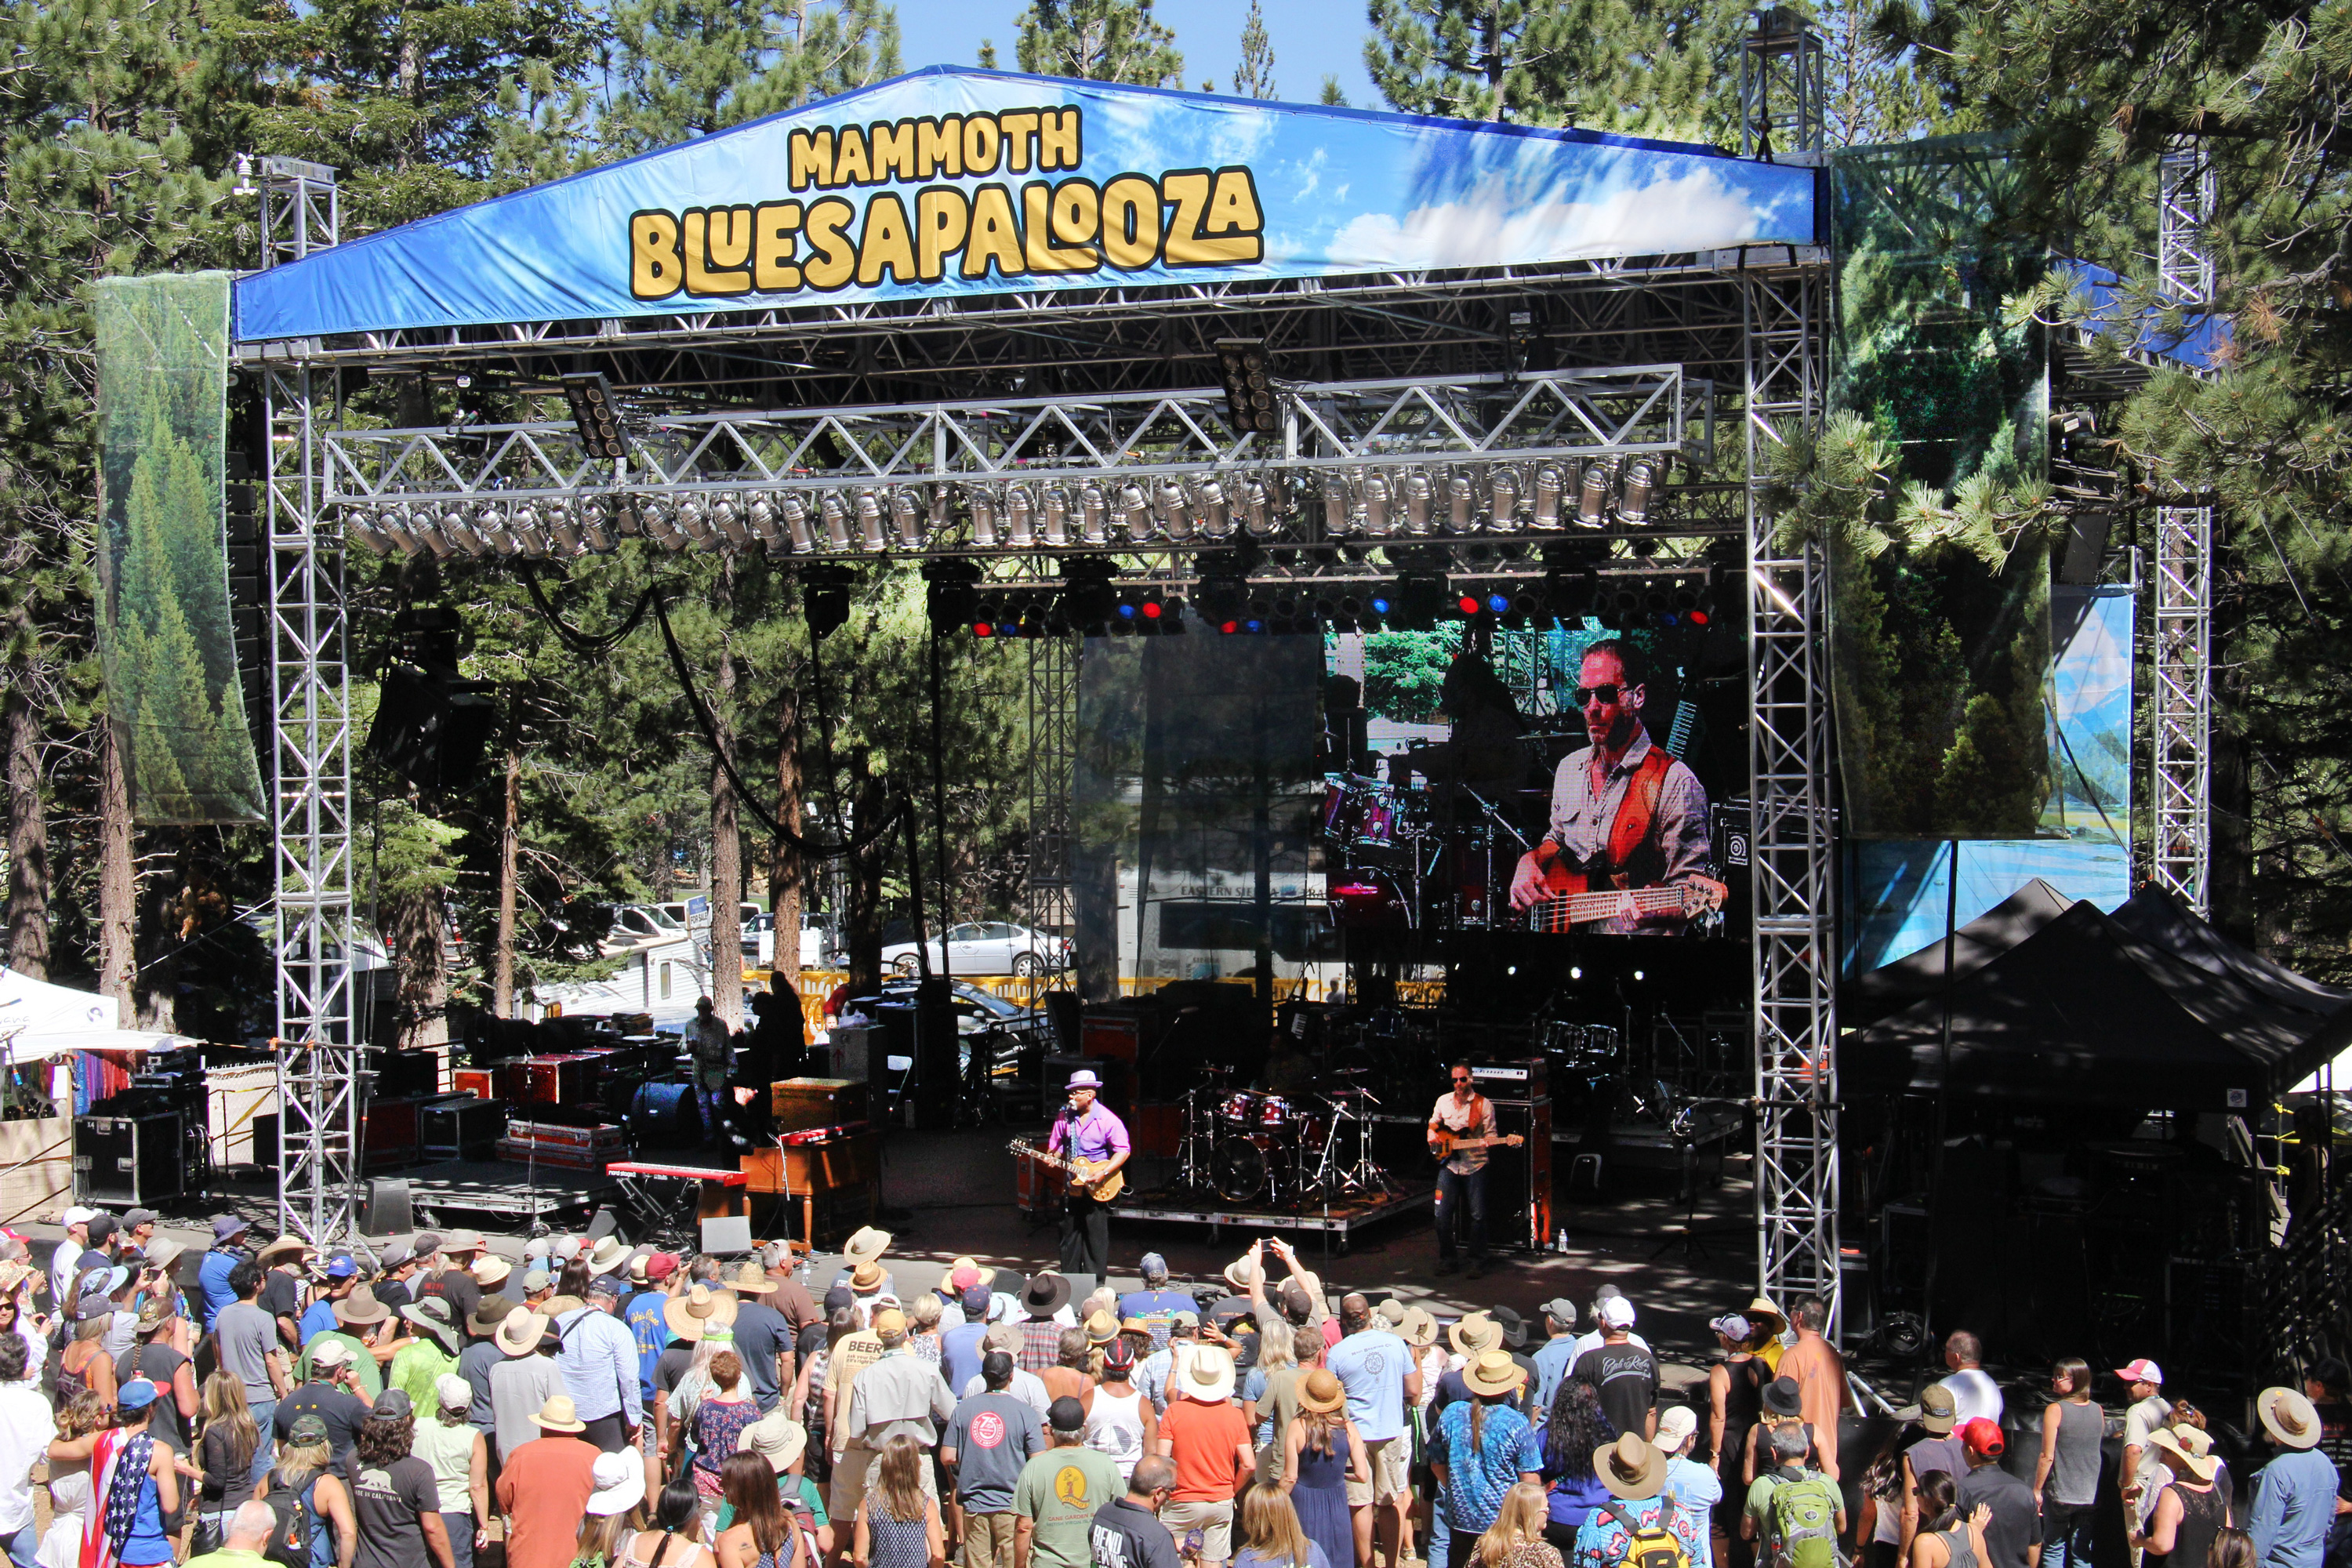 23rd annual Mammoth Festival of Beers & Bluesapalooza,  August 2-5, in Mammoth Lakes CA.